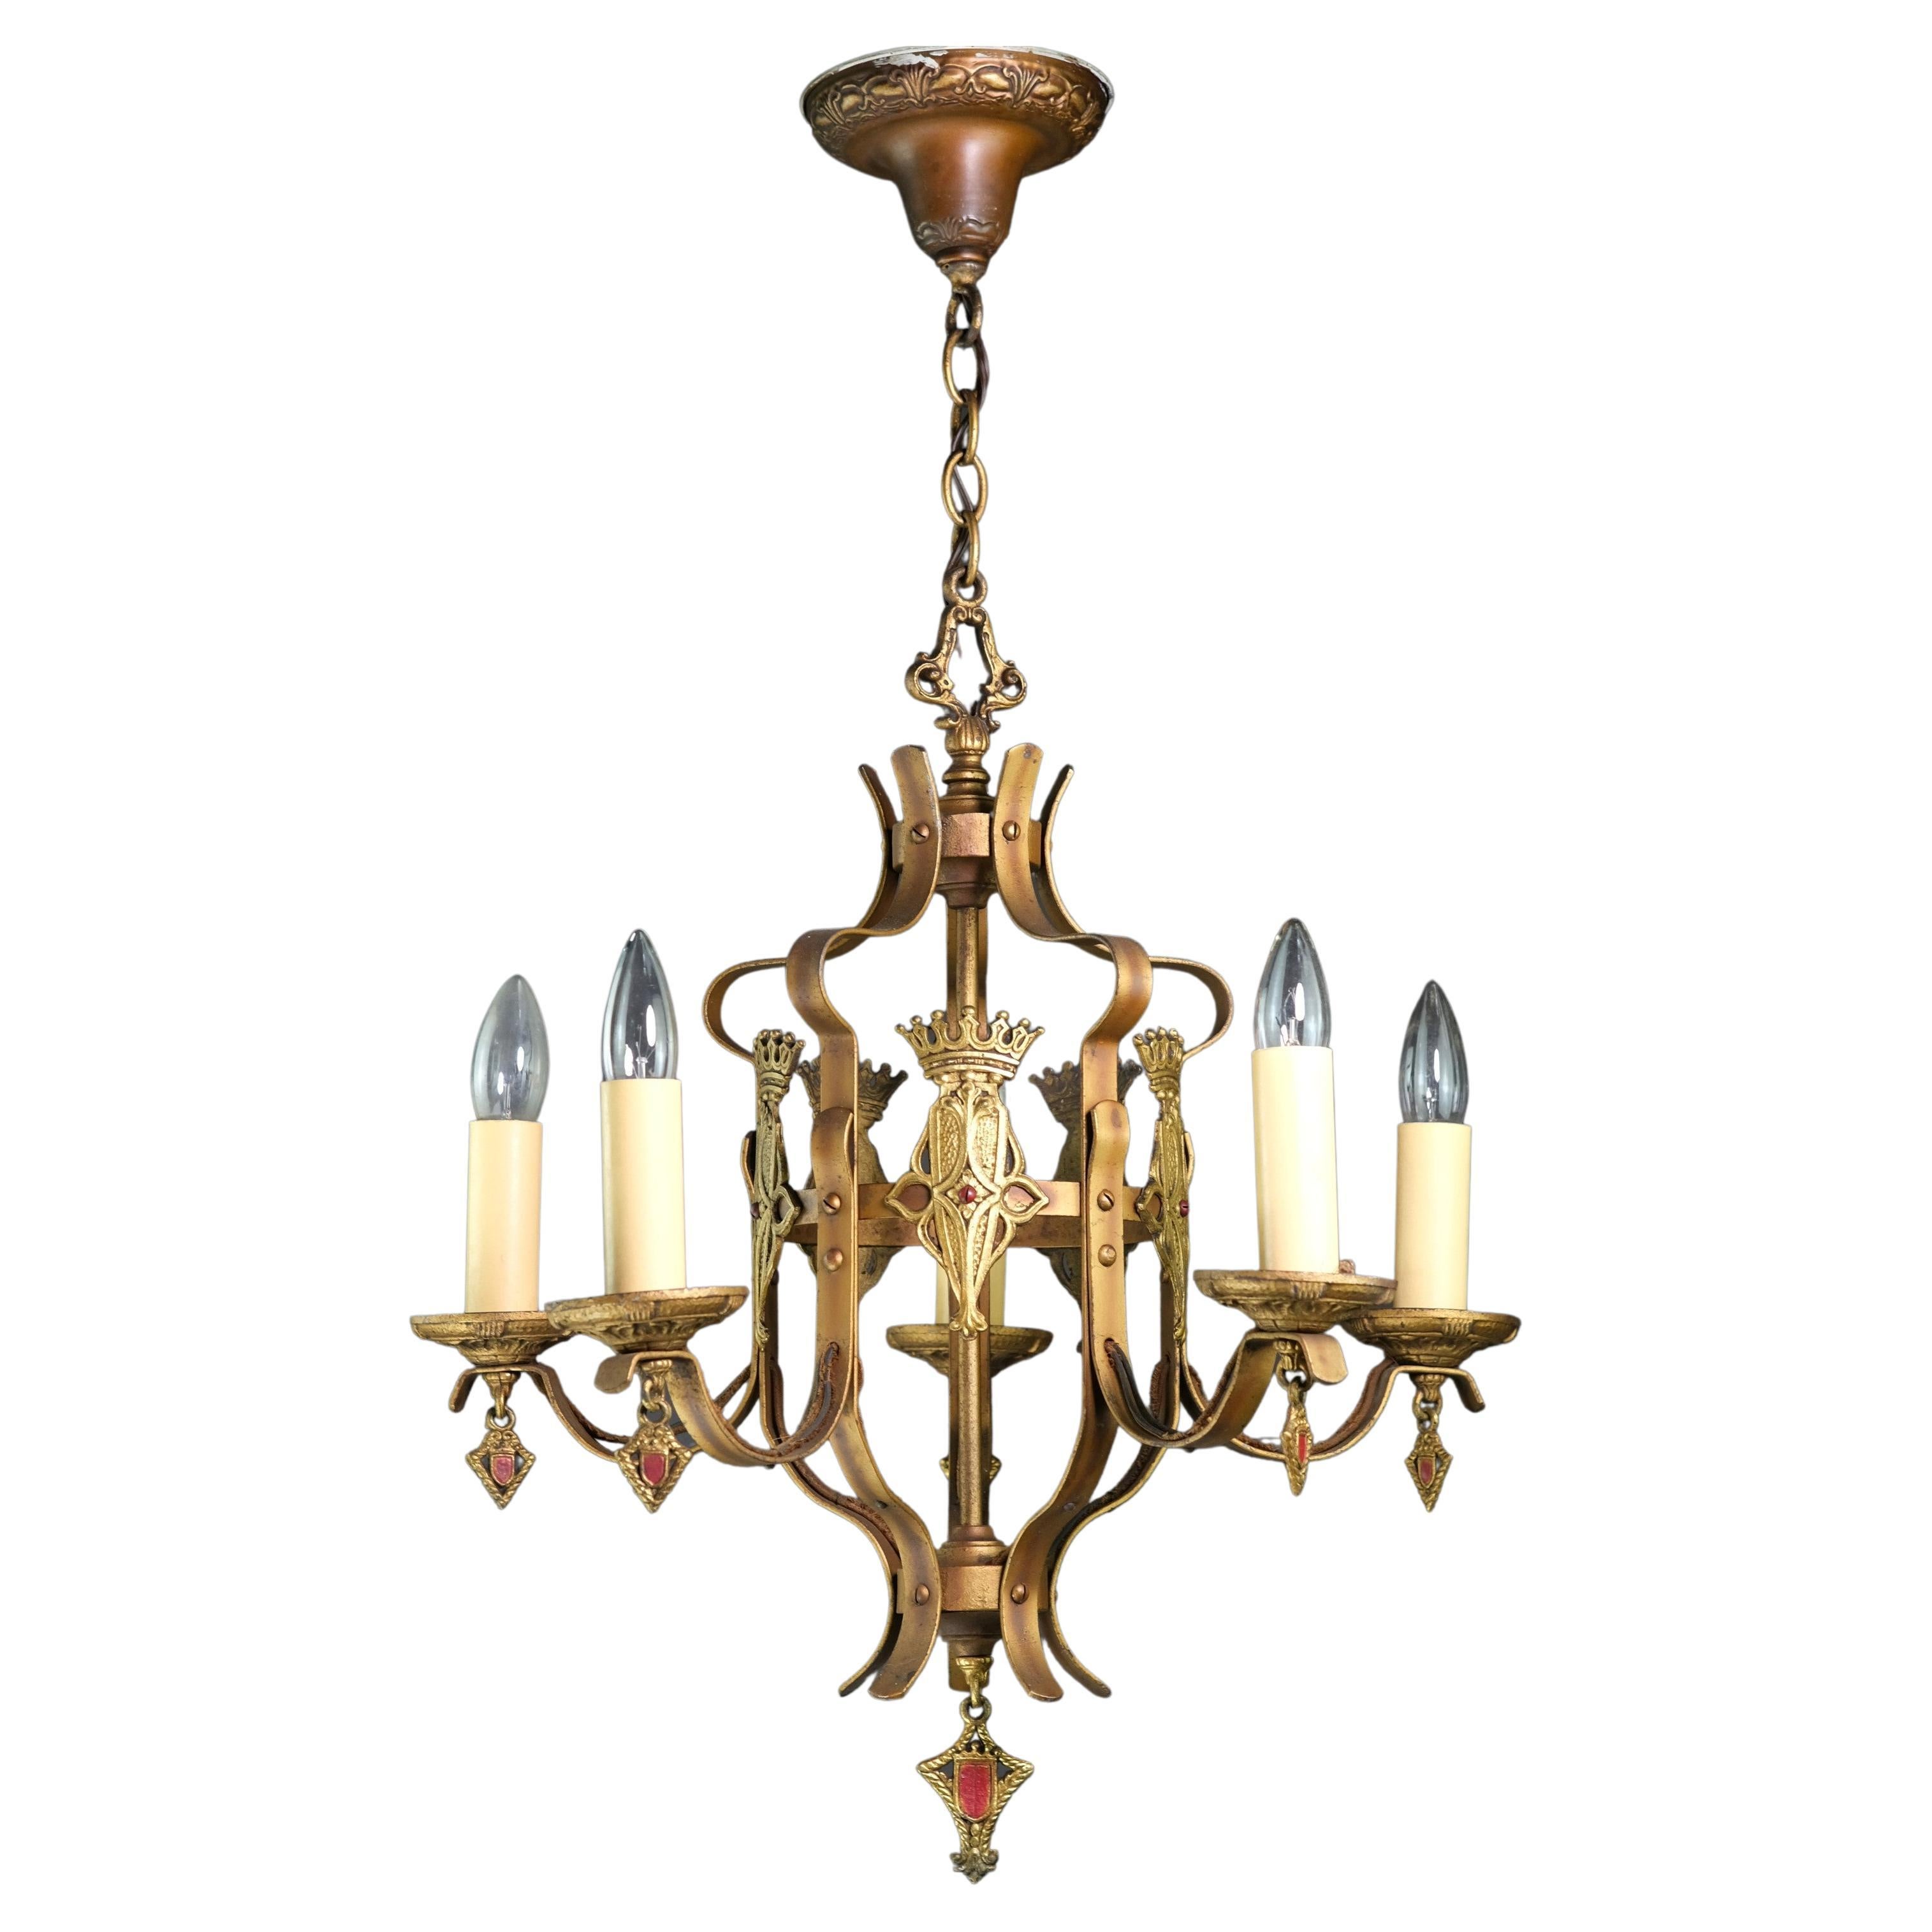 Spanish Revival 5 Light Gold Painted Chandelier Scrolls Finials For Sale